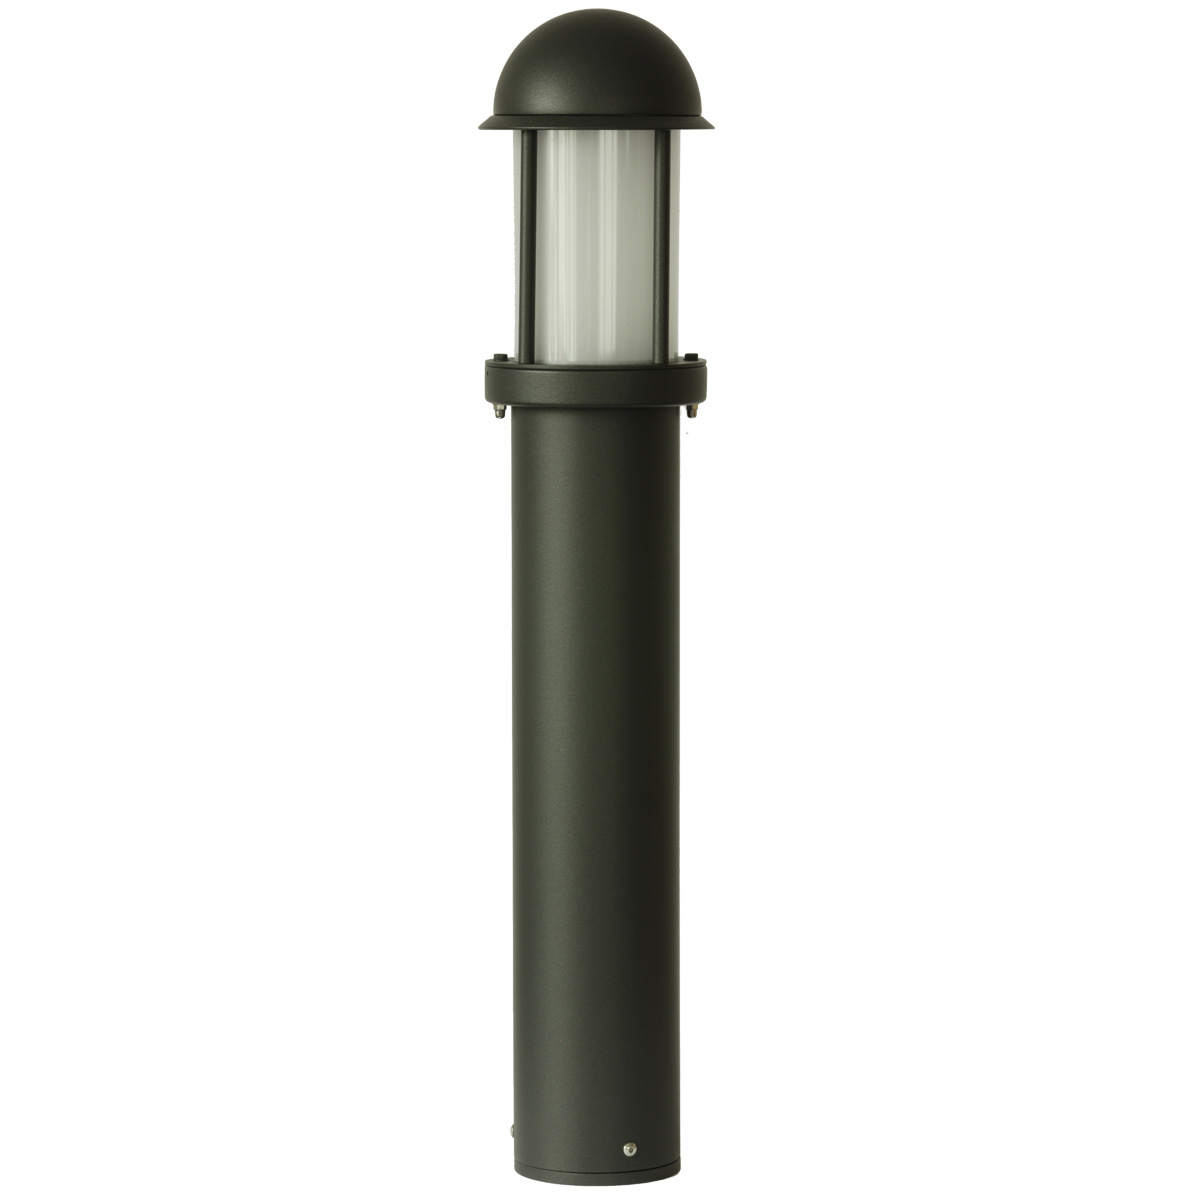 Bollard Light for Outdoors Available in Ten Different Colors